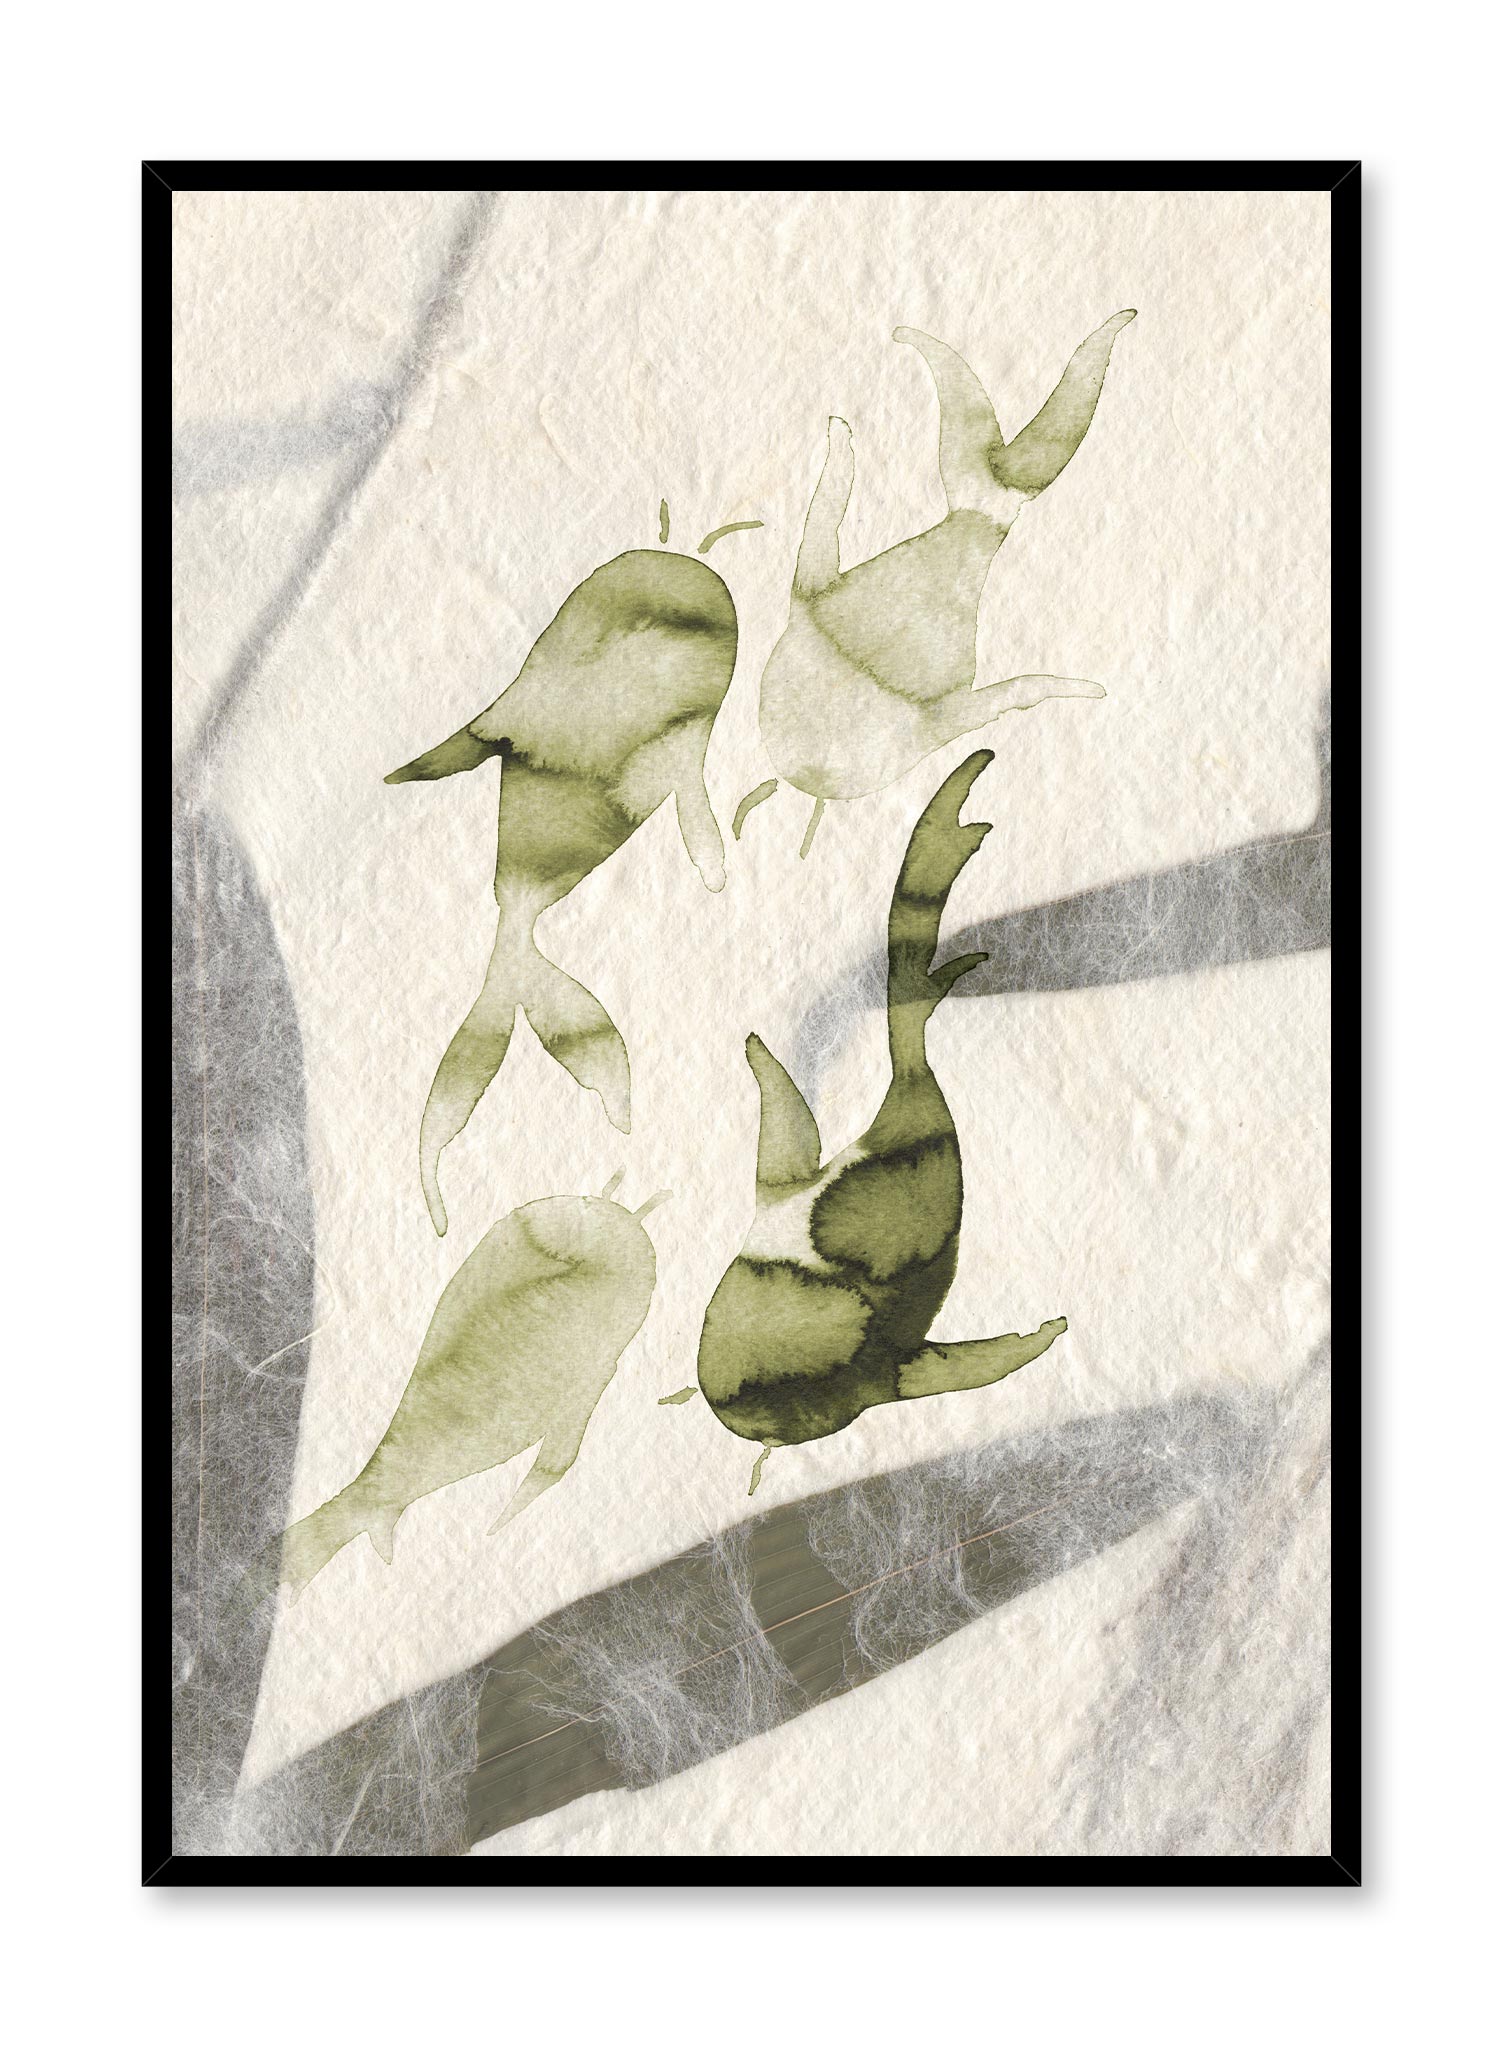 Nishikigoi is a minimalist illustration by Opposite Wall of the back view of four green koi fishes swimming around.